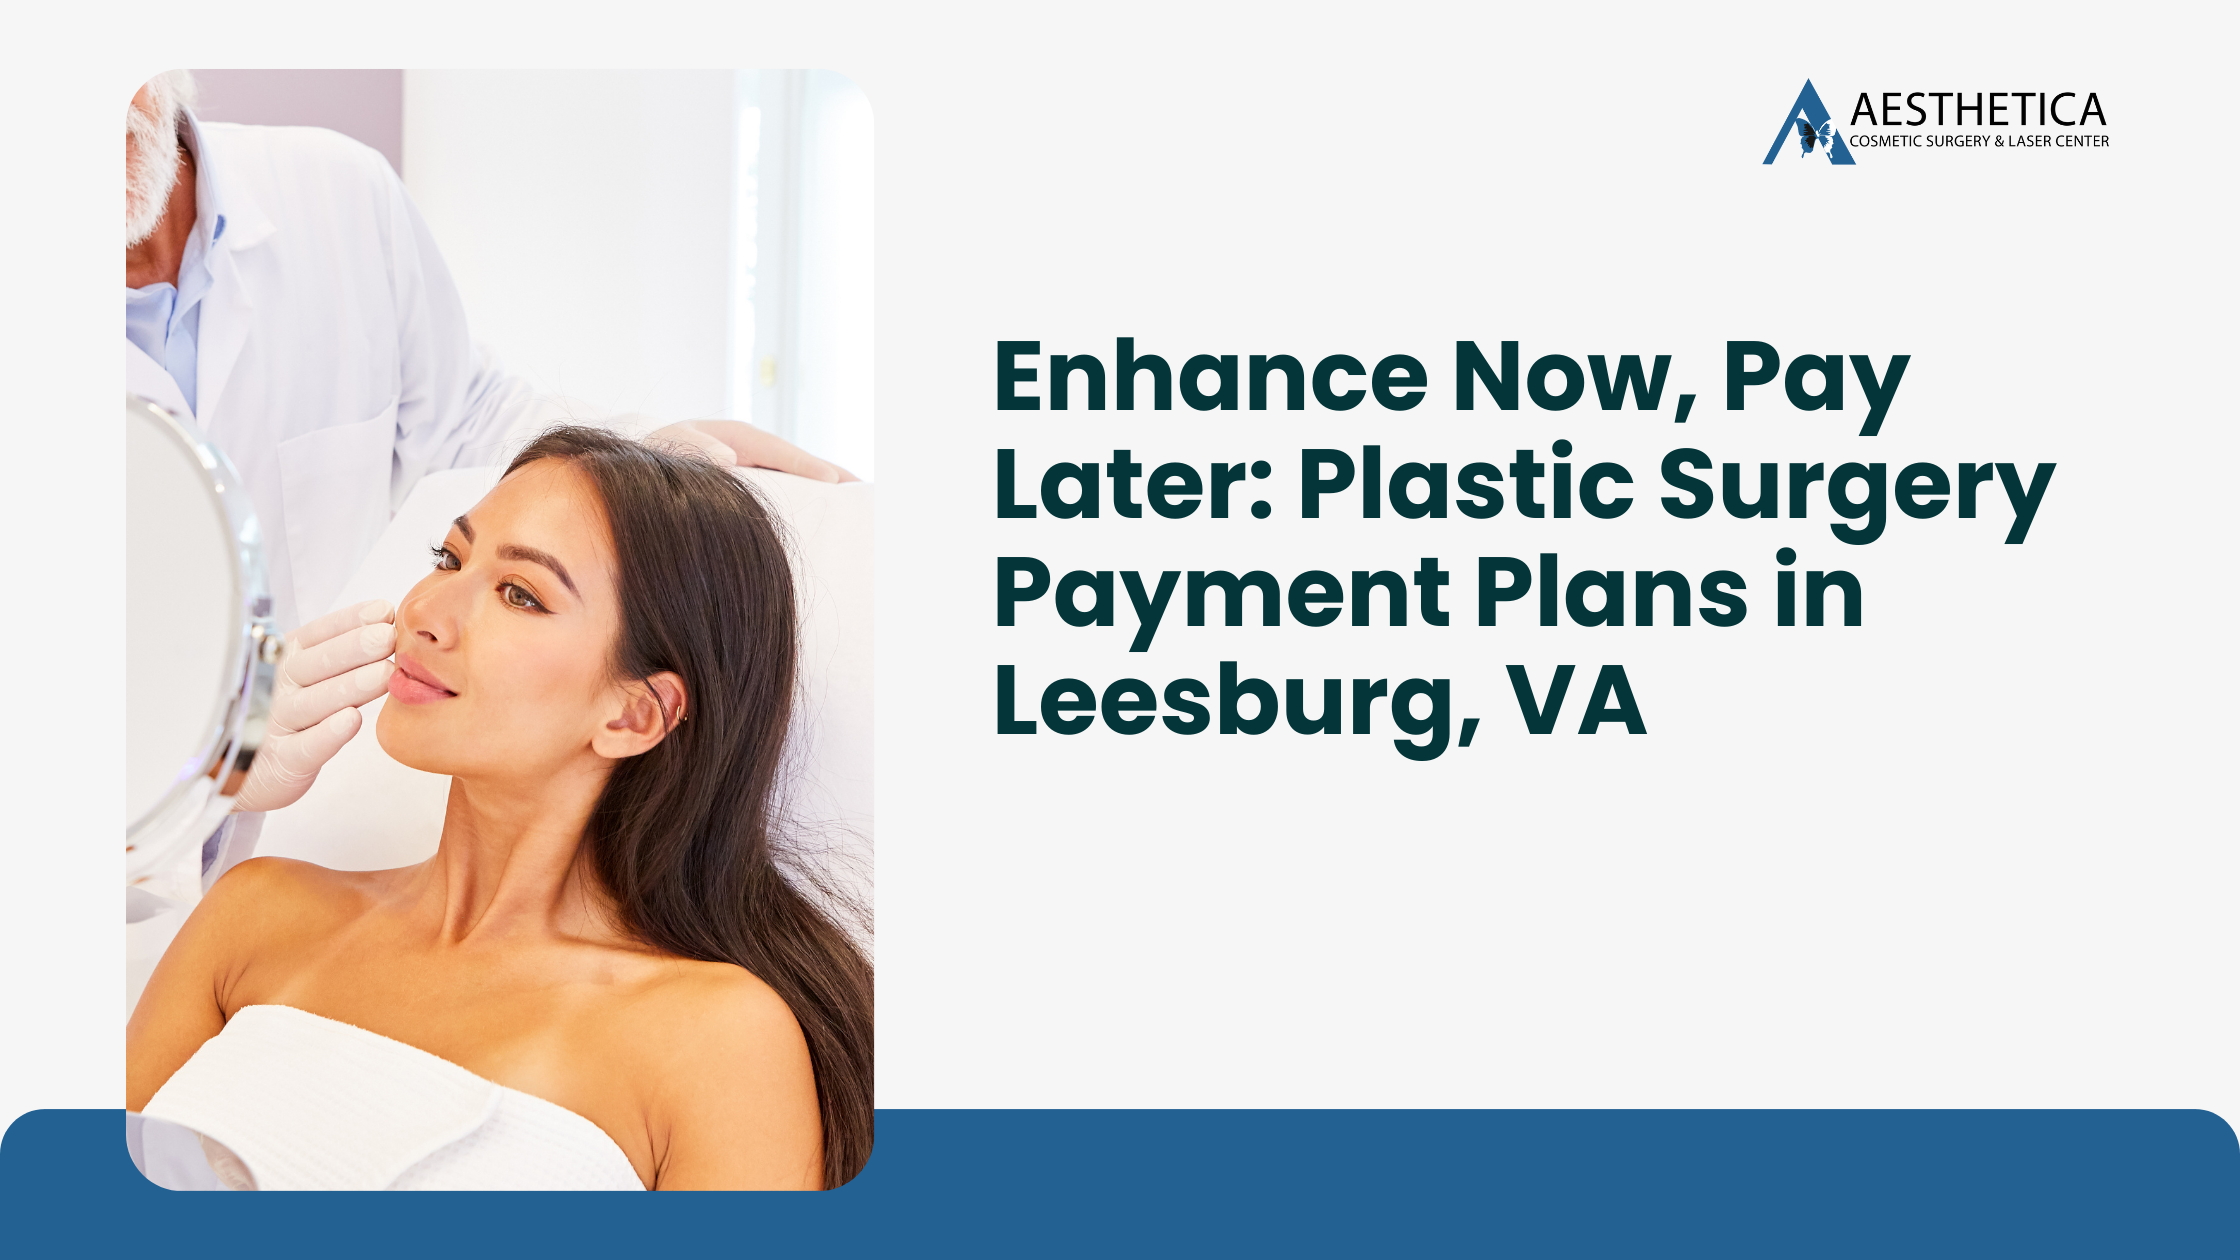 Enhance Now, Pay Later: Plastic Surgery Payment Plans in Leesburg, VA